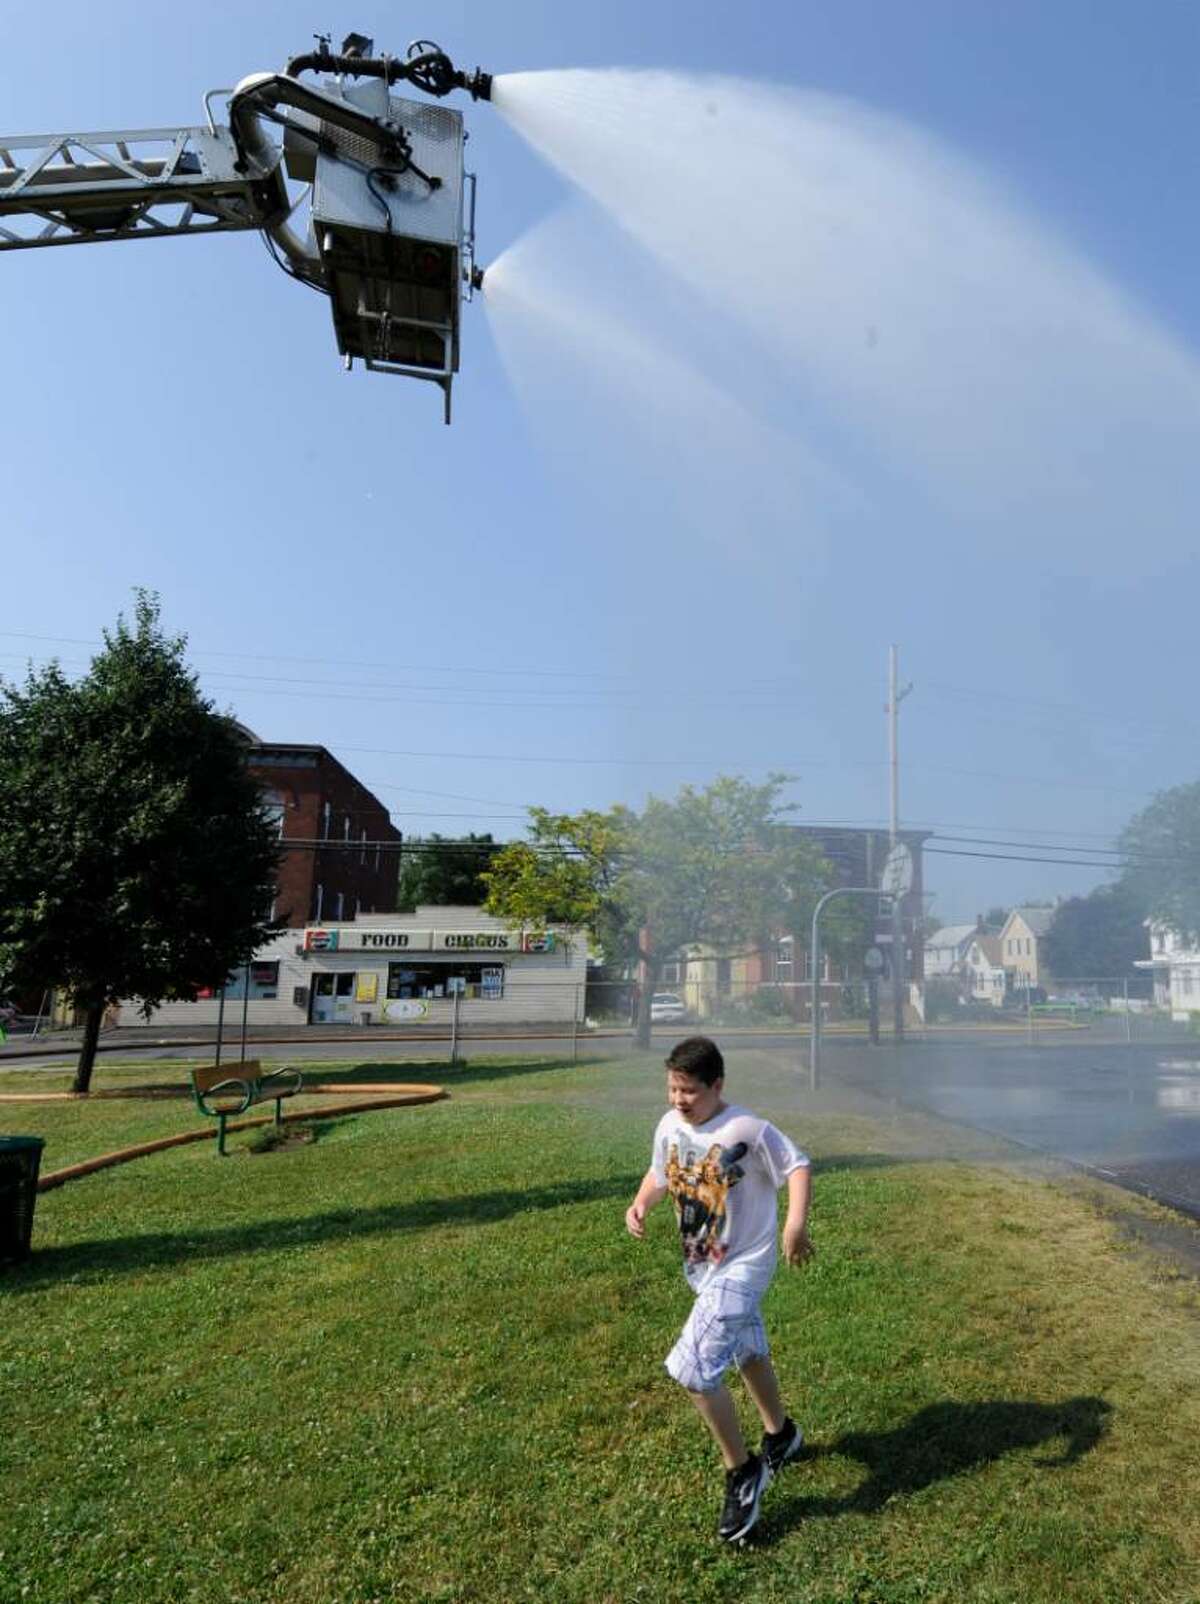 Michael Nash, age 10, runs through the spray from a Troy Fire Department reserve Ladder-Tower in the park on 112th Street in Troy, Tuesday morning. (Skip Dickstein/Times Union)